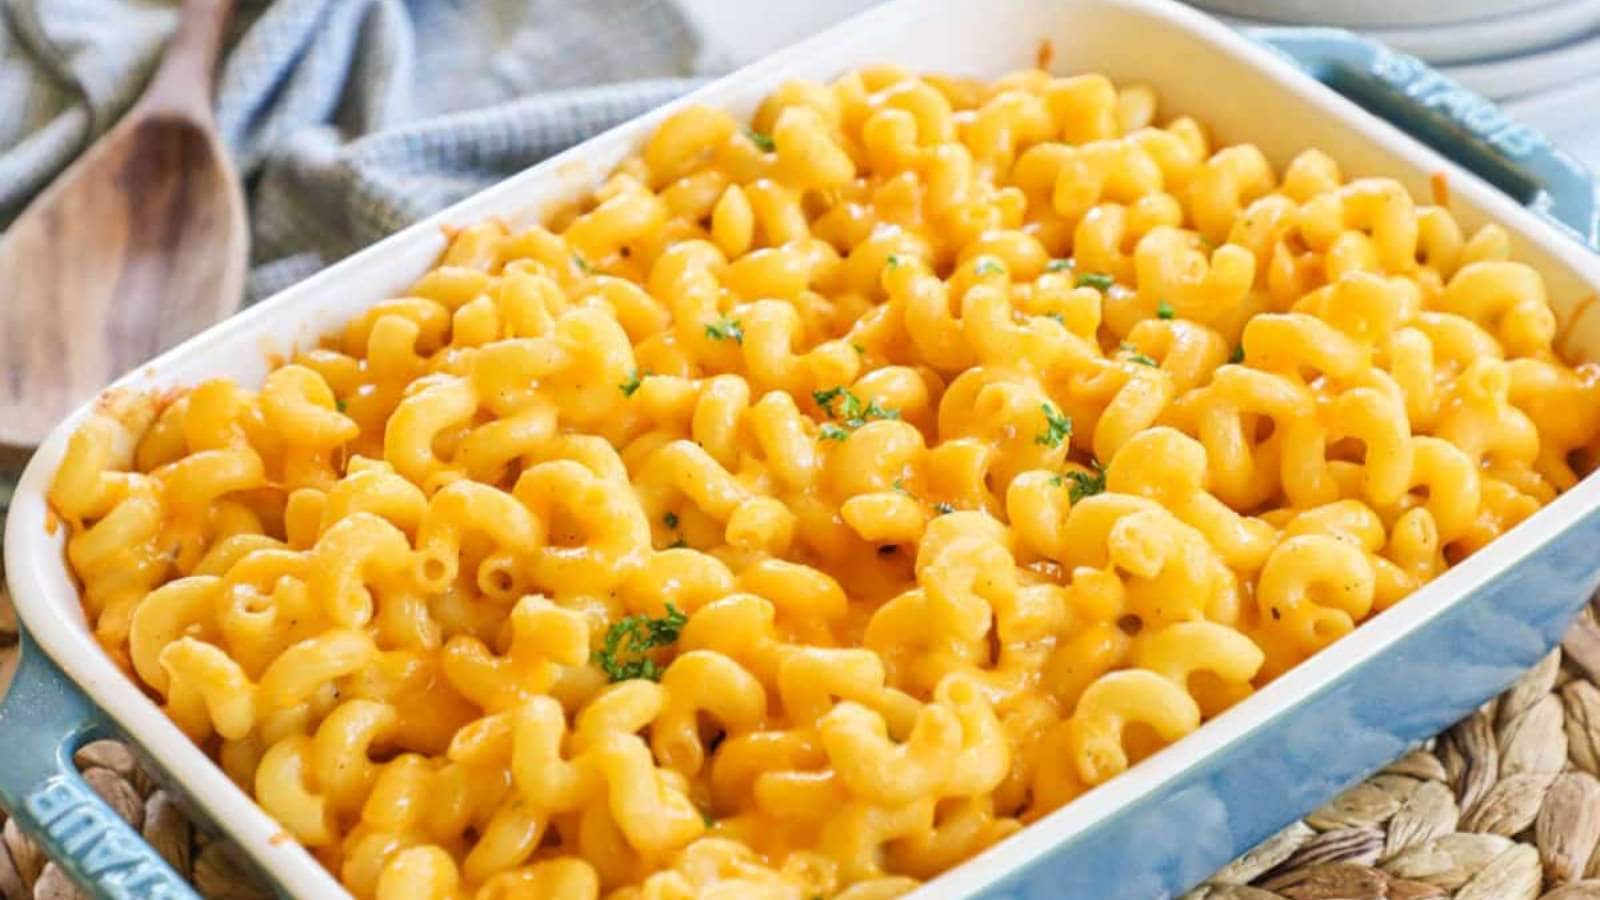 Baked Macaroni and Cheese recipe by Easy Family Recipes.